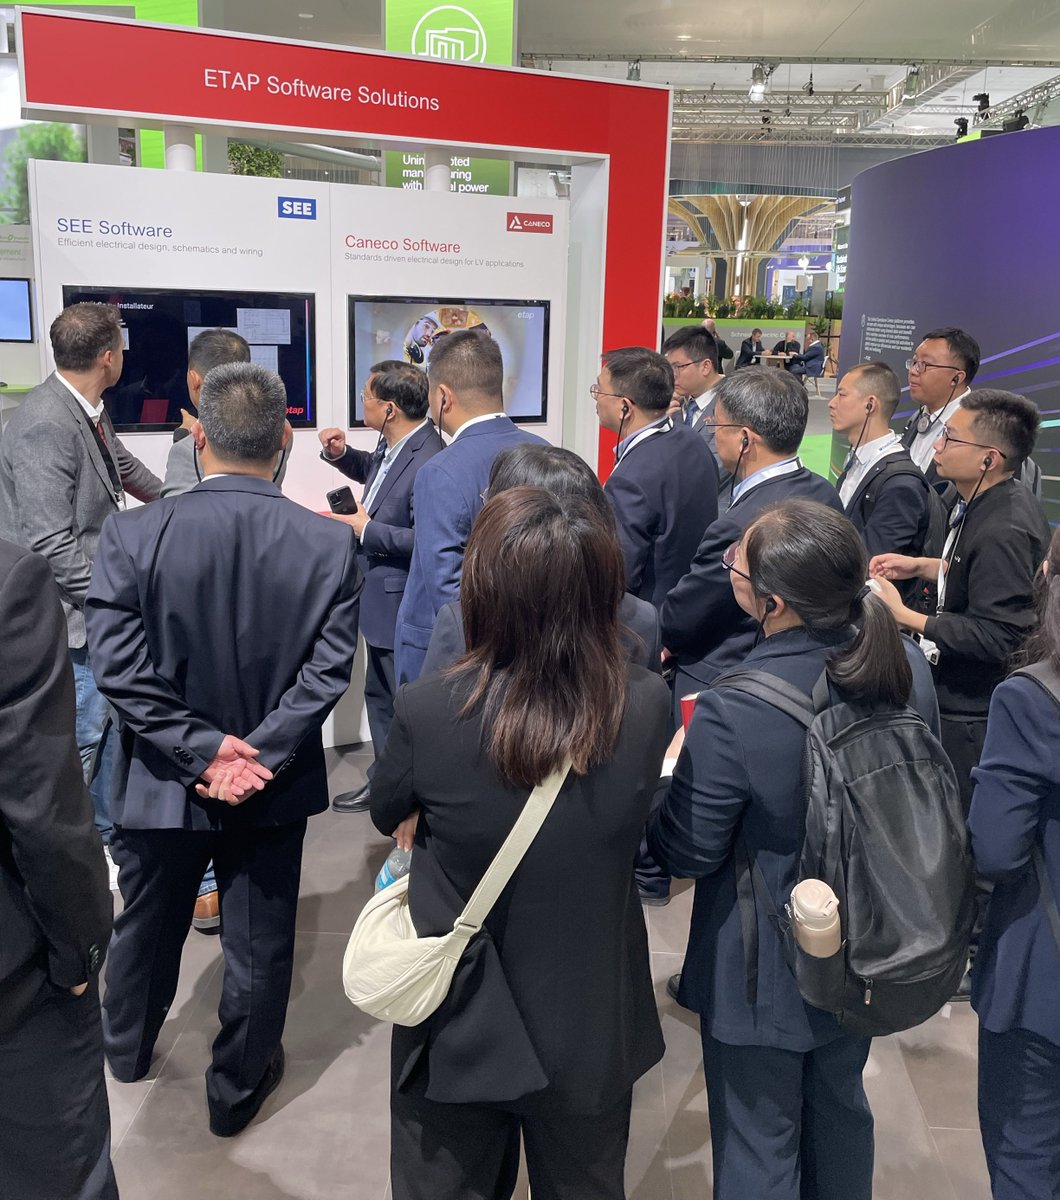 #HannoverMesse:
We showcased our wider portfolio, our Unified Electrical #DigitalTwin platform & we hosted sessions on sustainability. Grateful for having received this overwhelming response, reaffirming our commitment to innovation & sustainability in #electricalengineering.